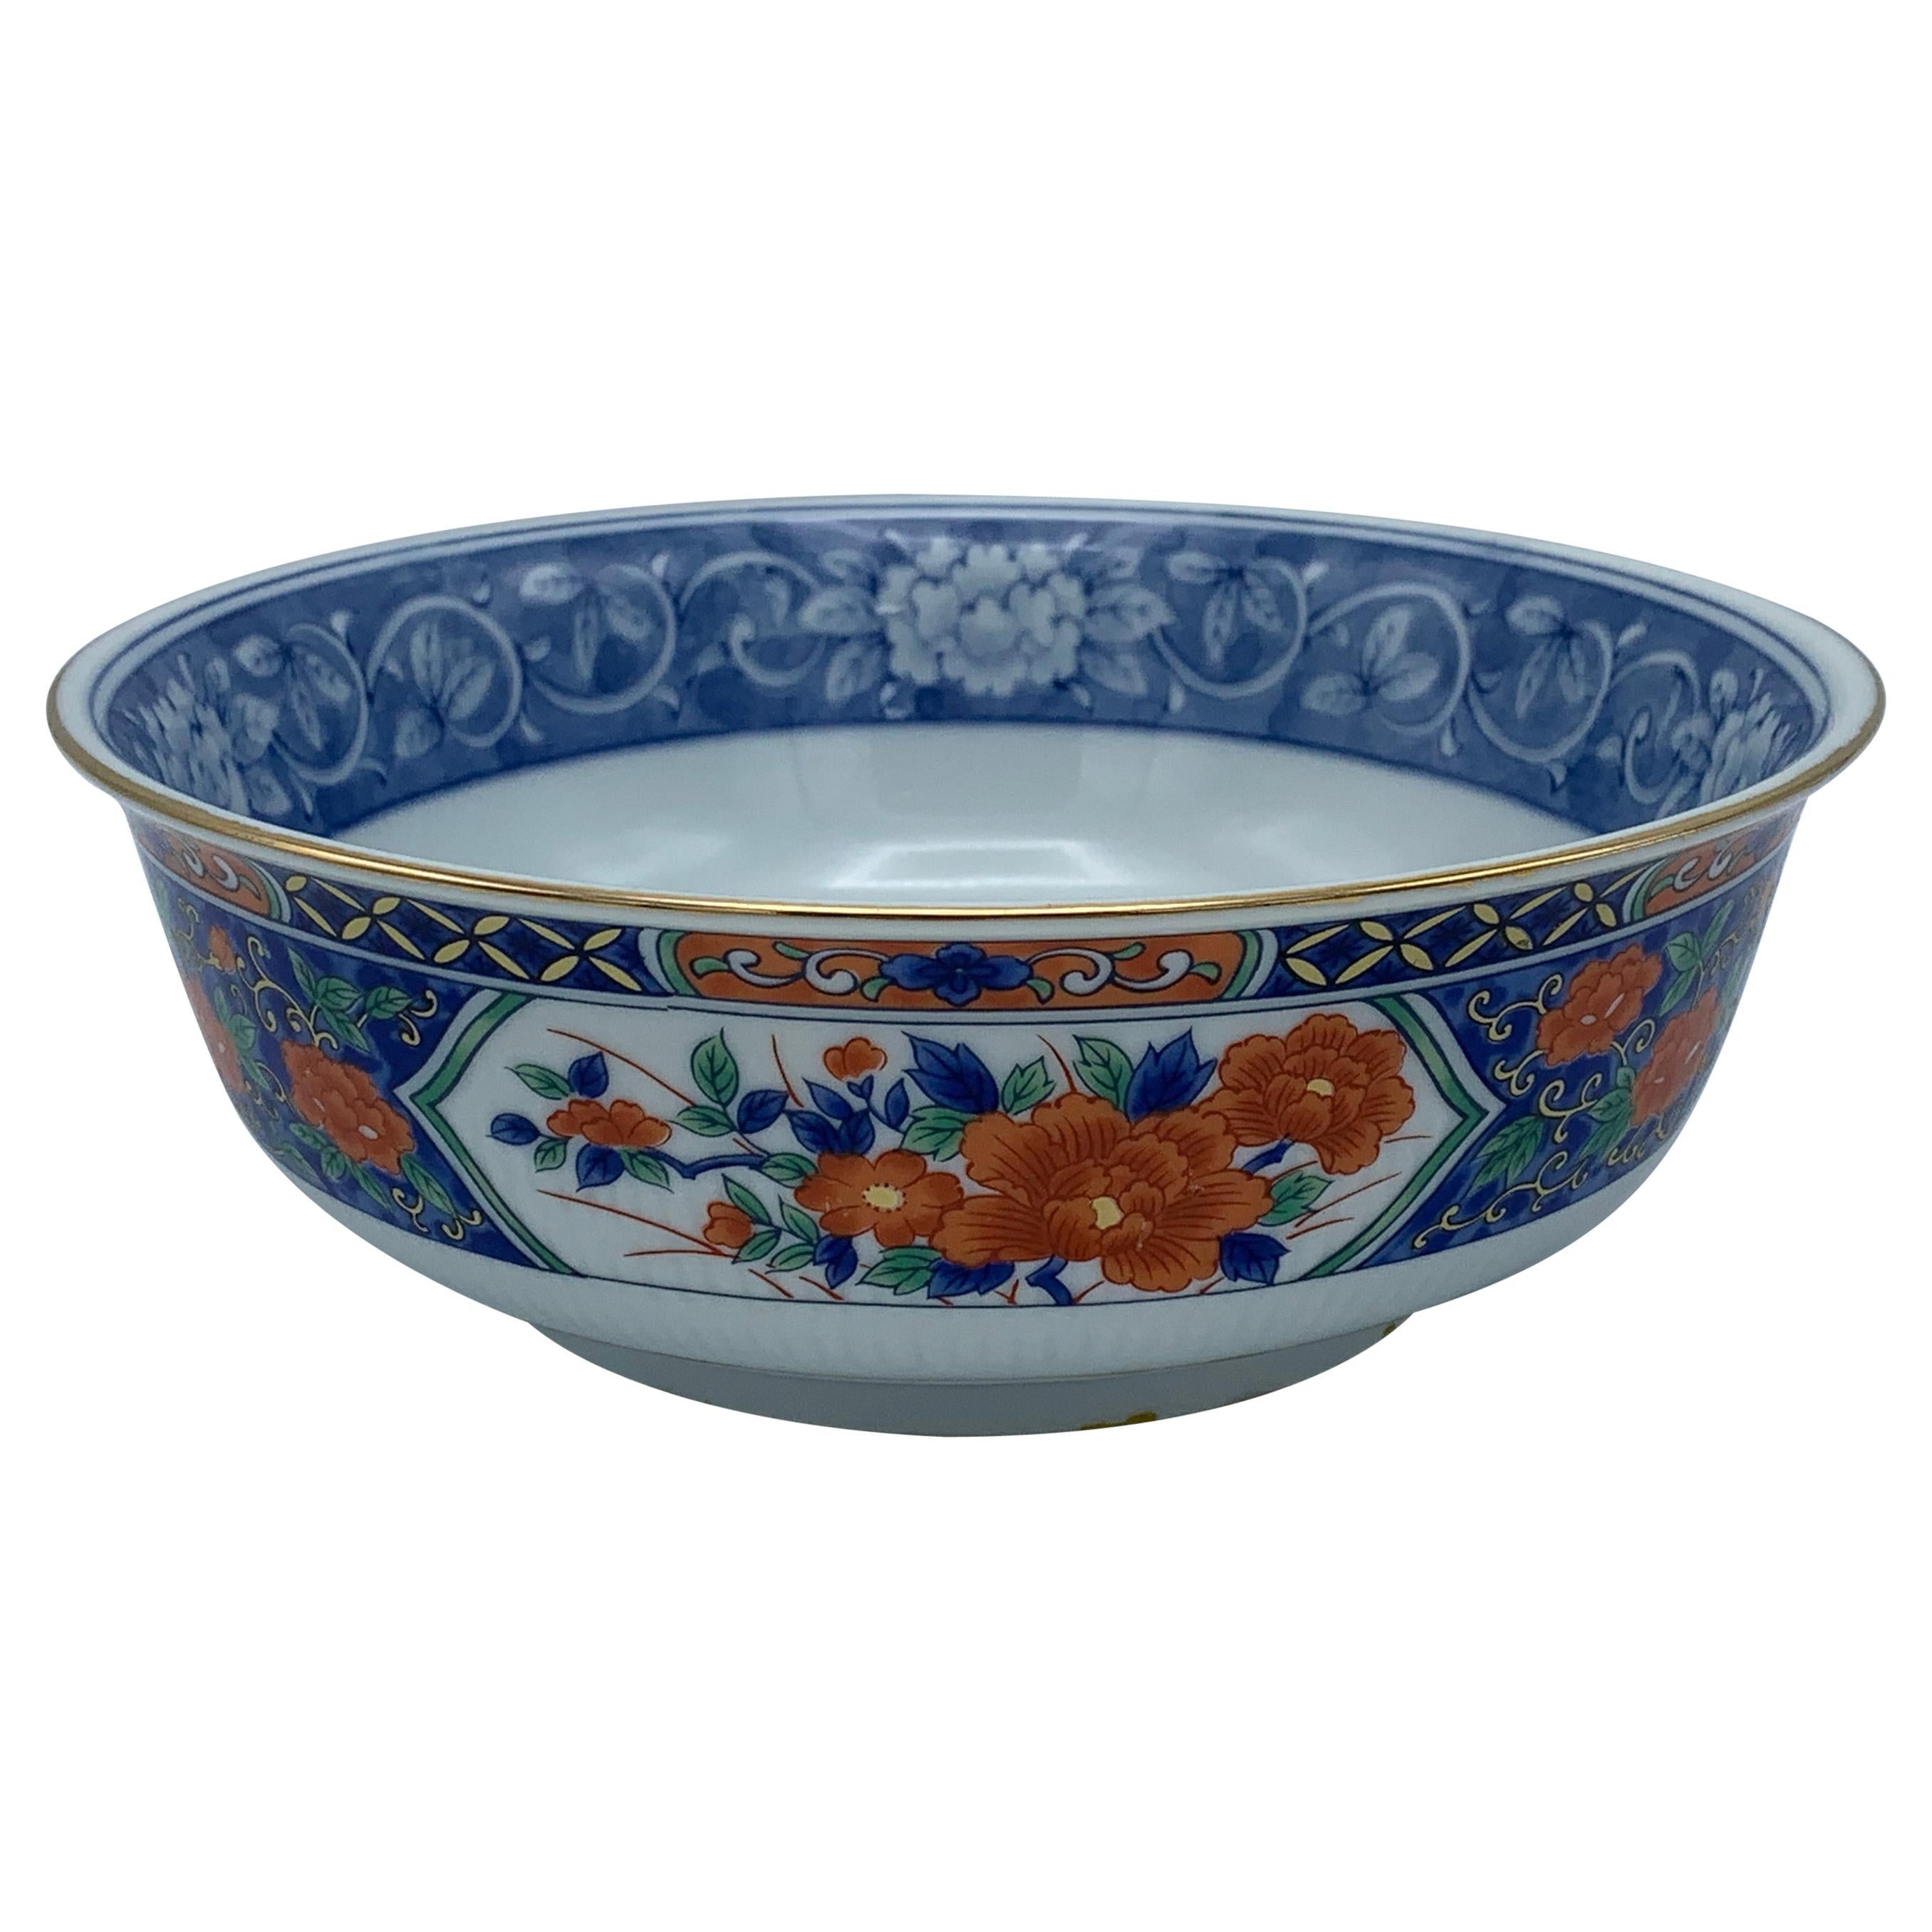 1970s Tiffany & Co. Chinoiserie Blue and White Imari-Style Catchall Bowl